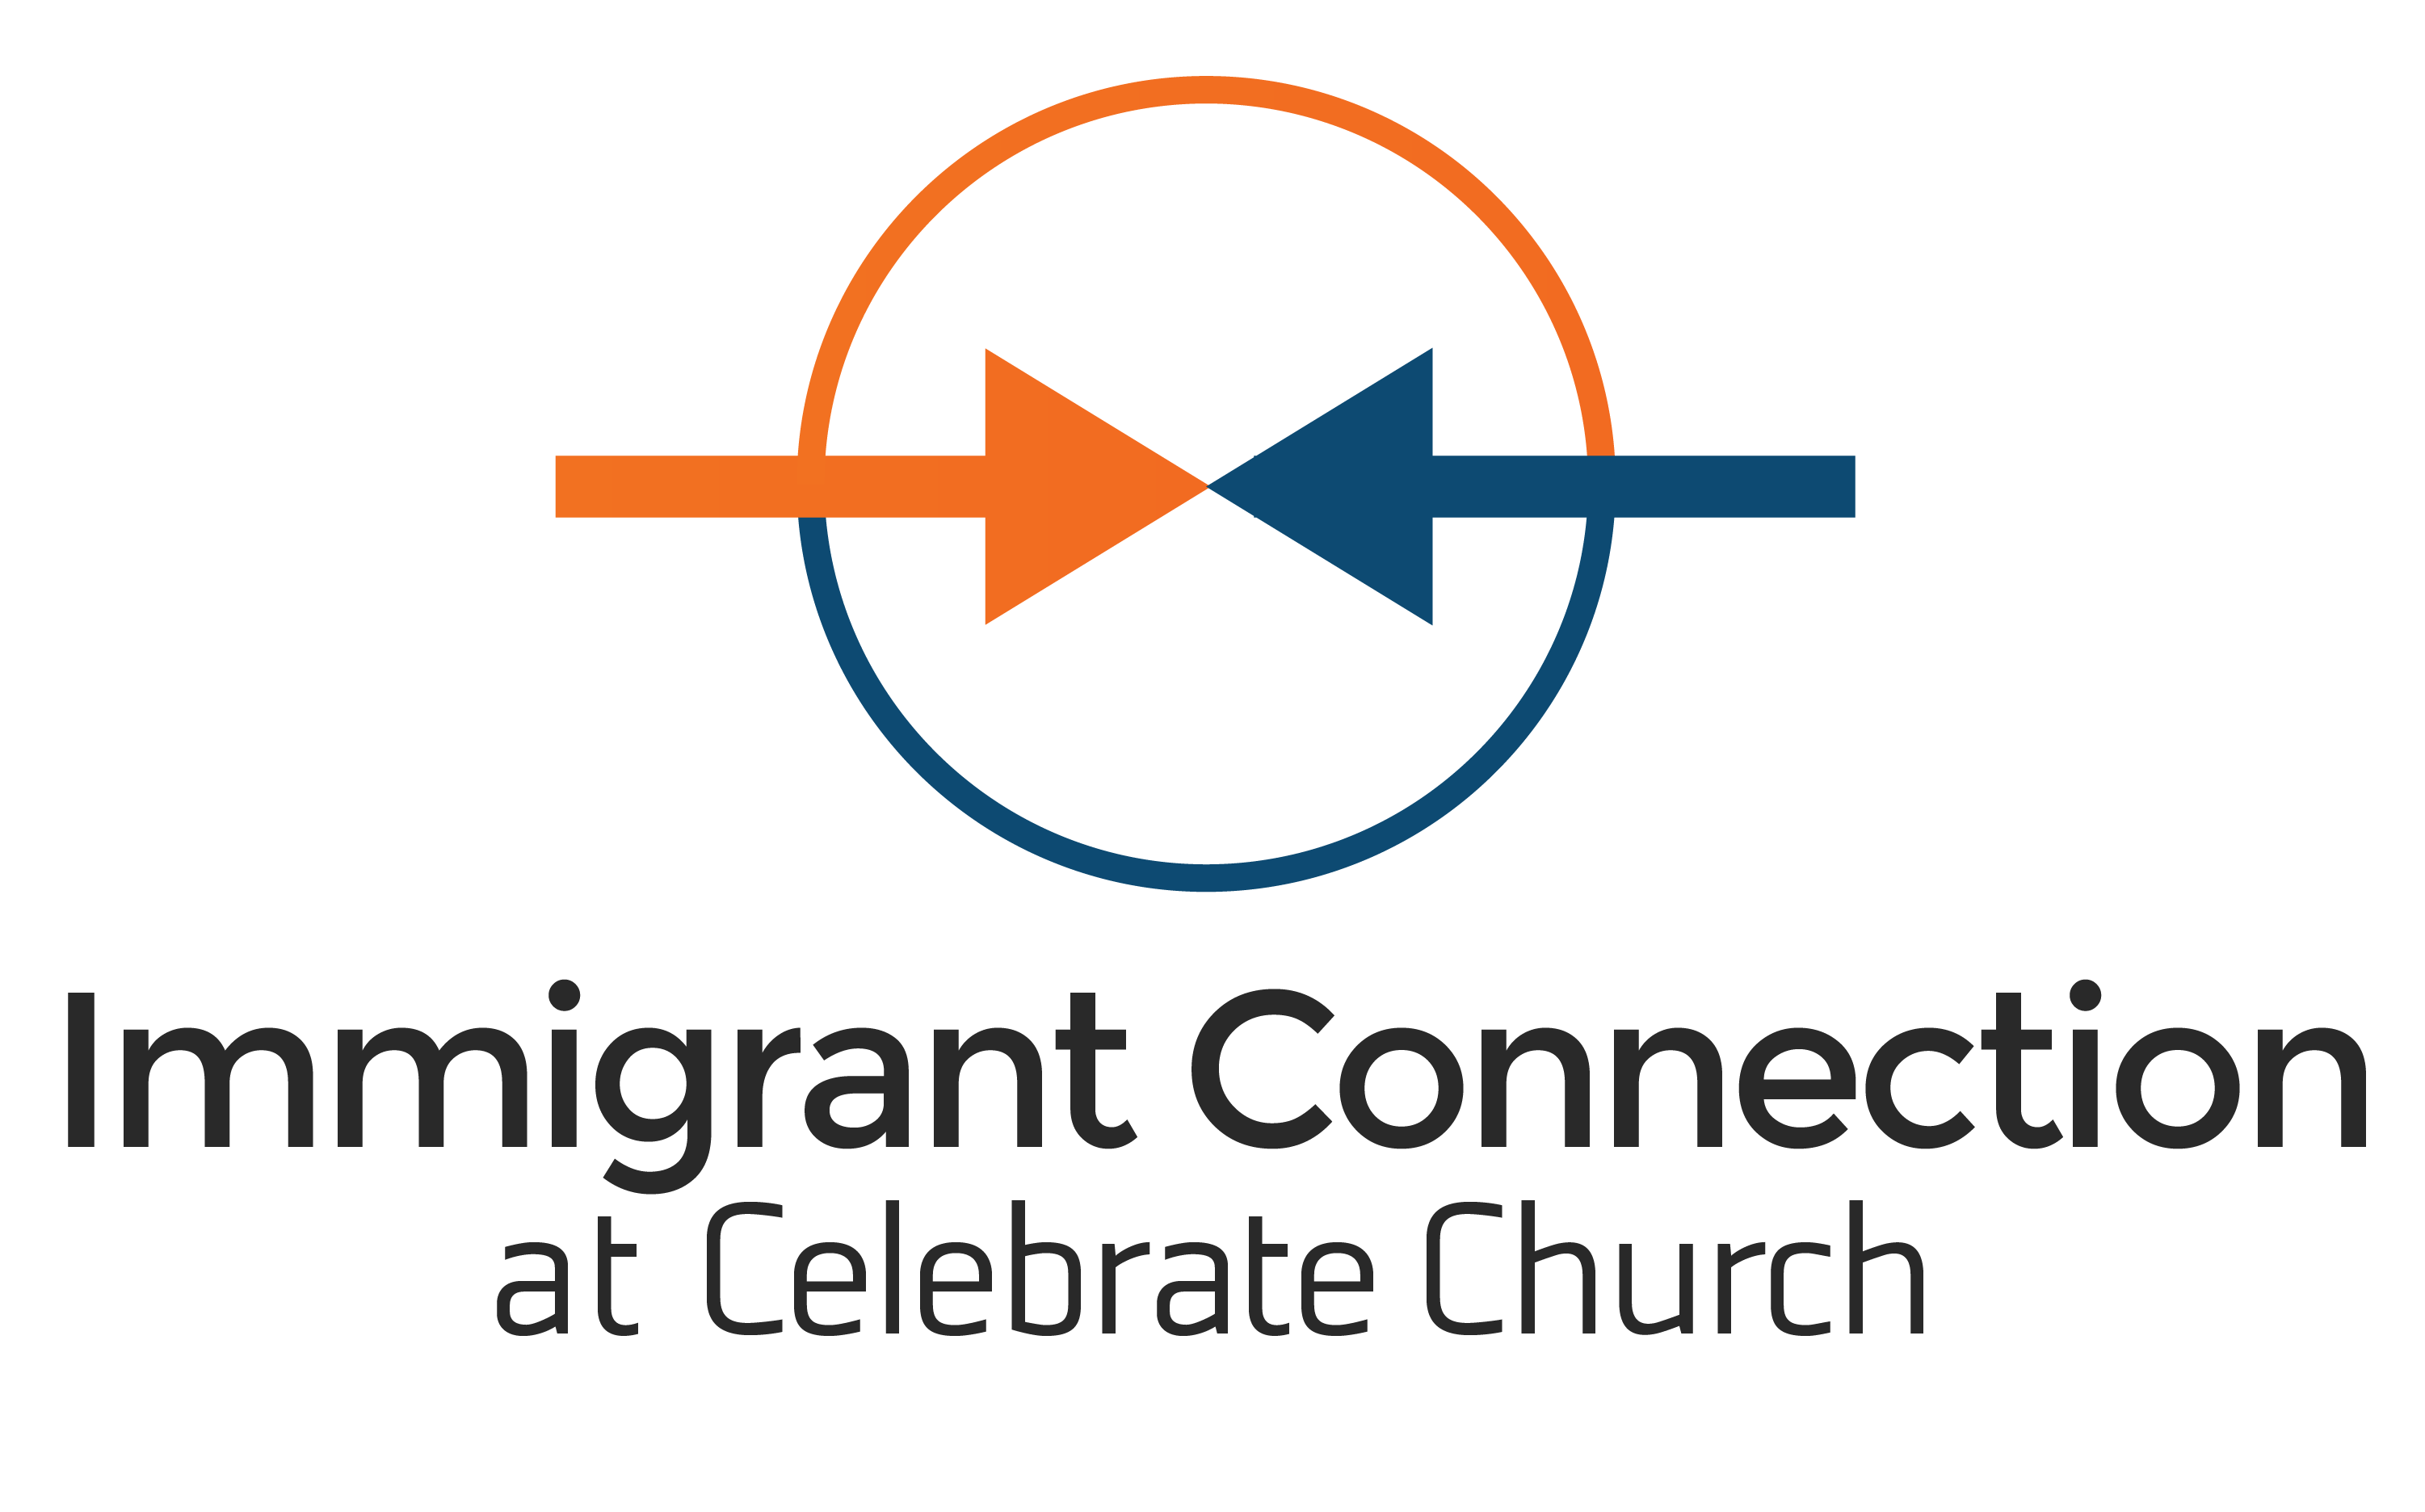 Immigrant Connection at Celebrate Church